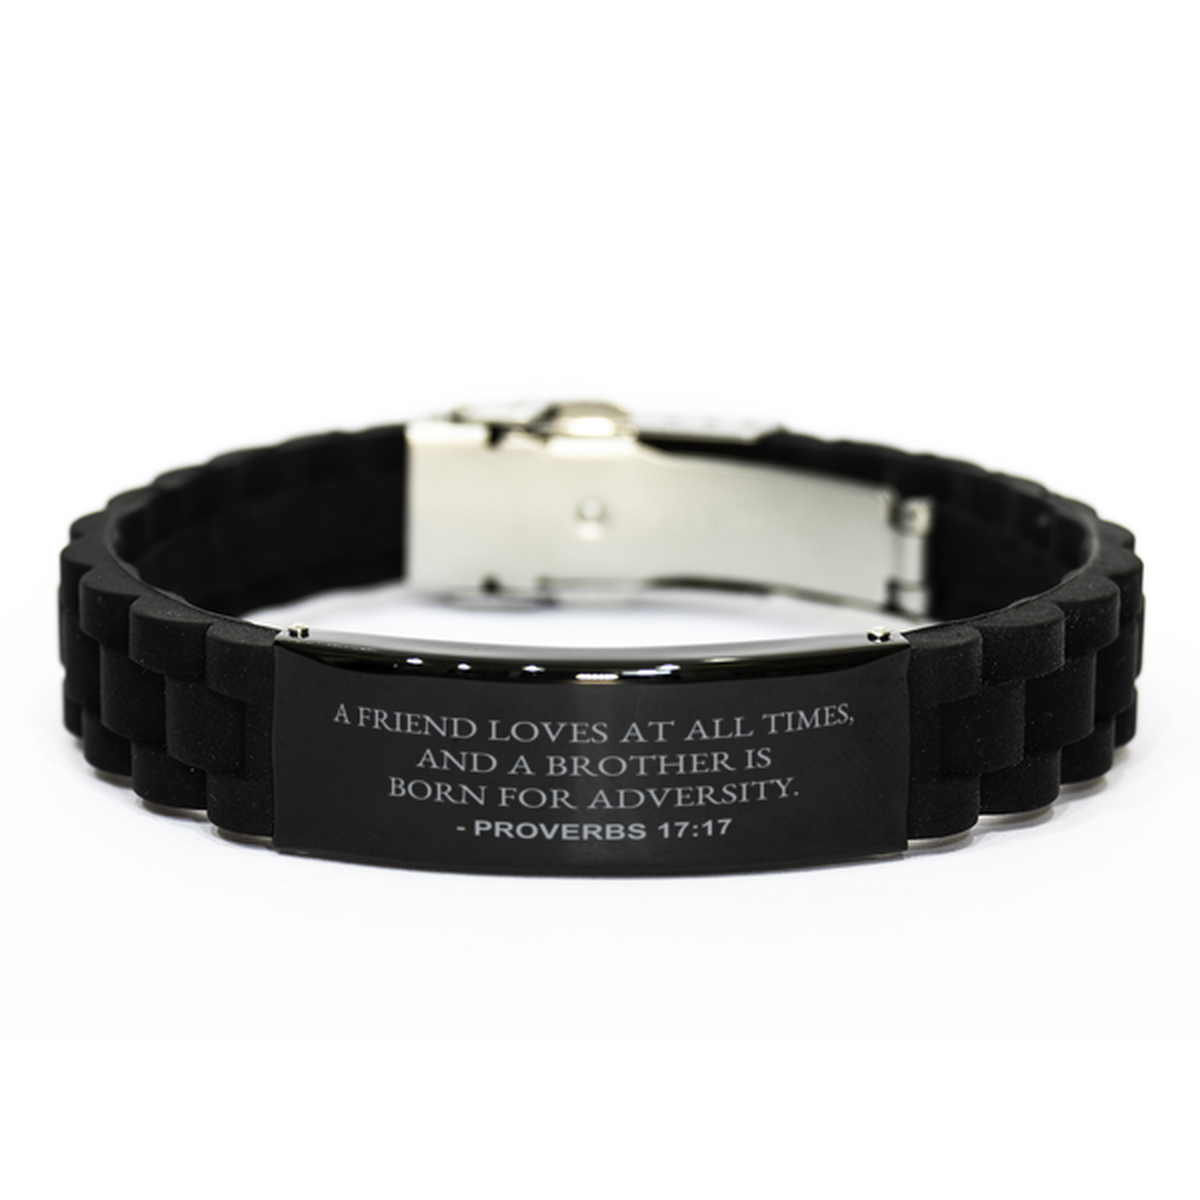 Bible Verse Black Bracelet,, Proverbs 17:17 A Friend Loves At All Times, And A Brother Is, Inspirational Christian Gifts For Men Women